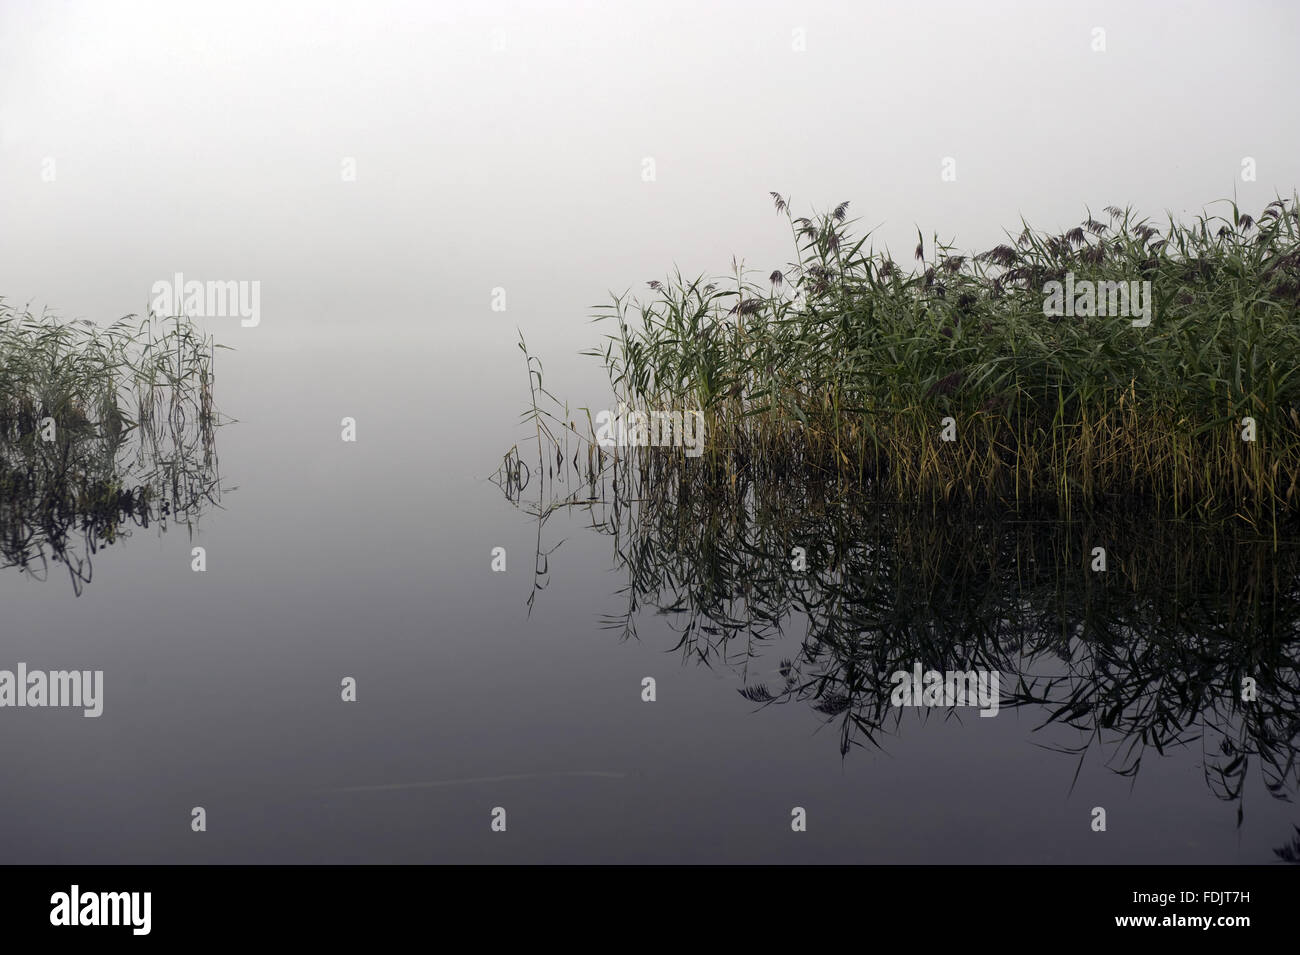 Misty view across Lough Erne at Crom, Co. Fermanagh, Northern Ireland. Stock Photo